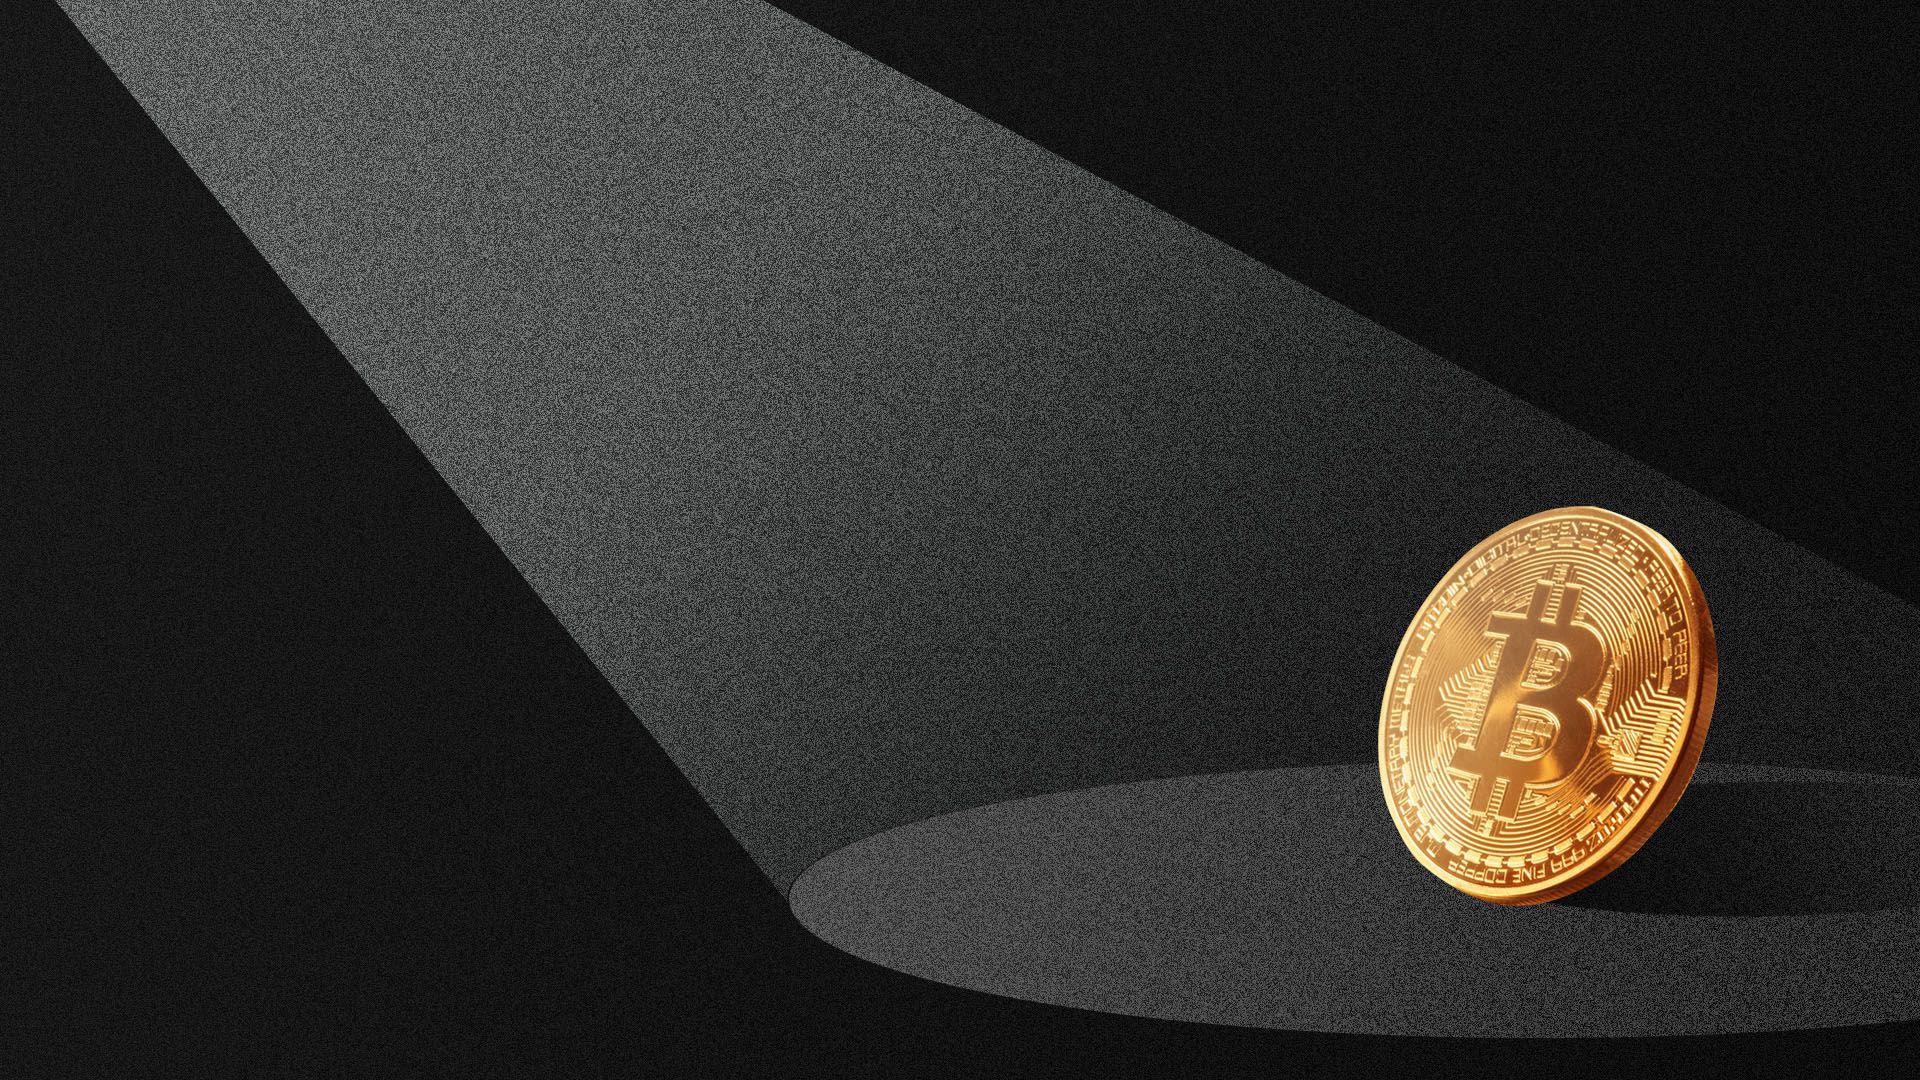 Illustration of a light shining on a bitcoin in the dark.